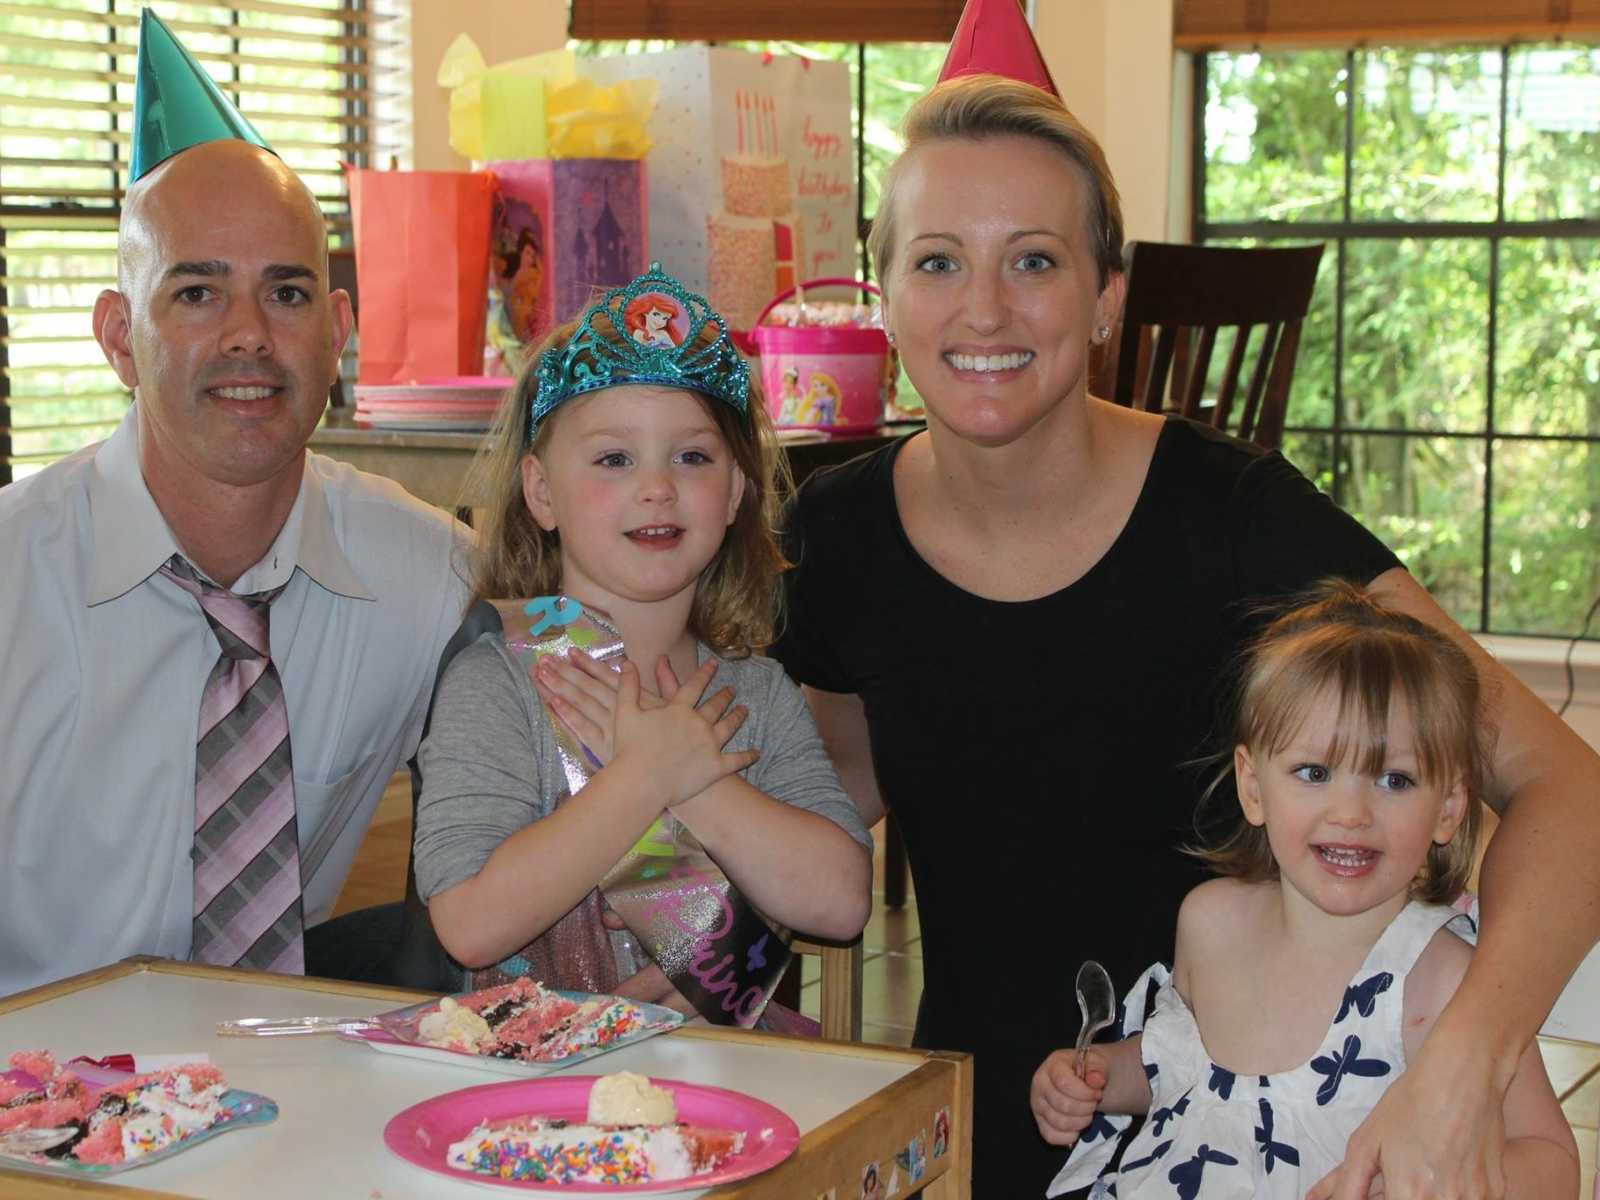 Mother and father with party hats on sit and smile with two daughter at table with cake and table of presents in background